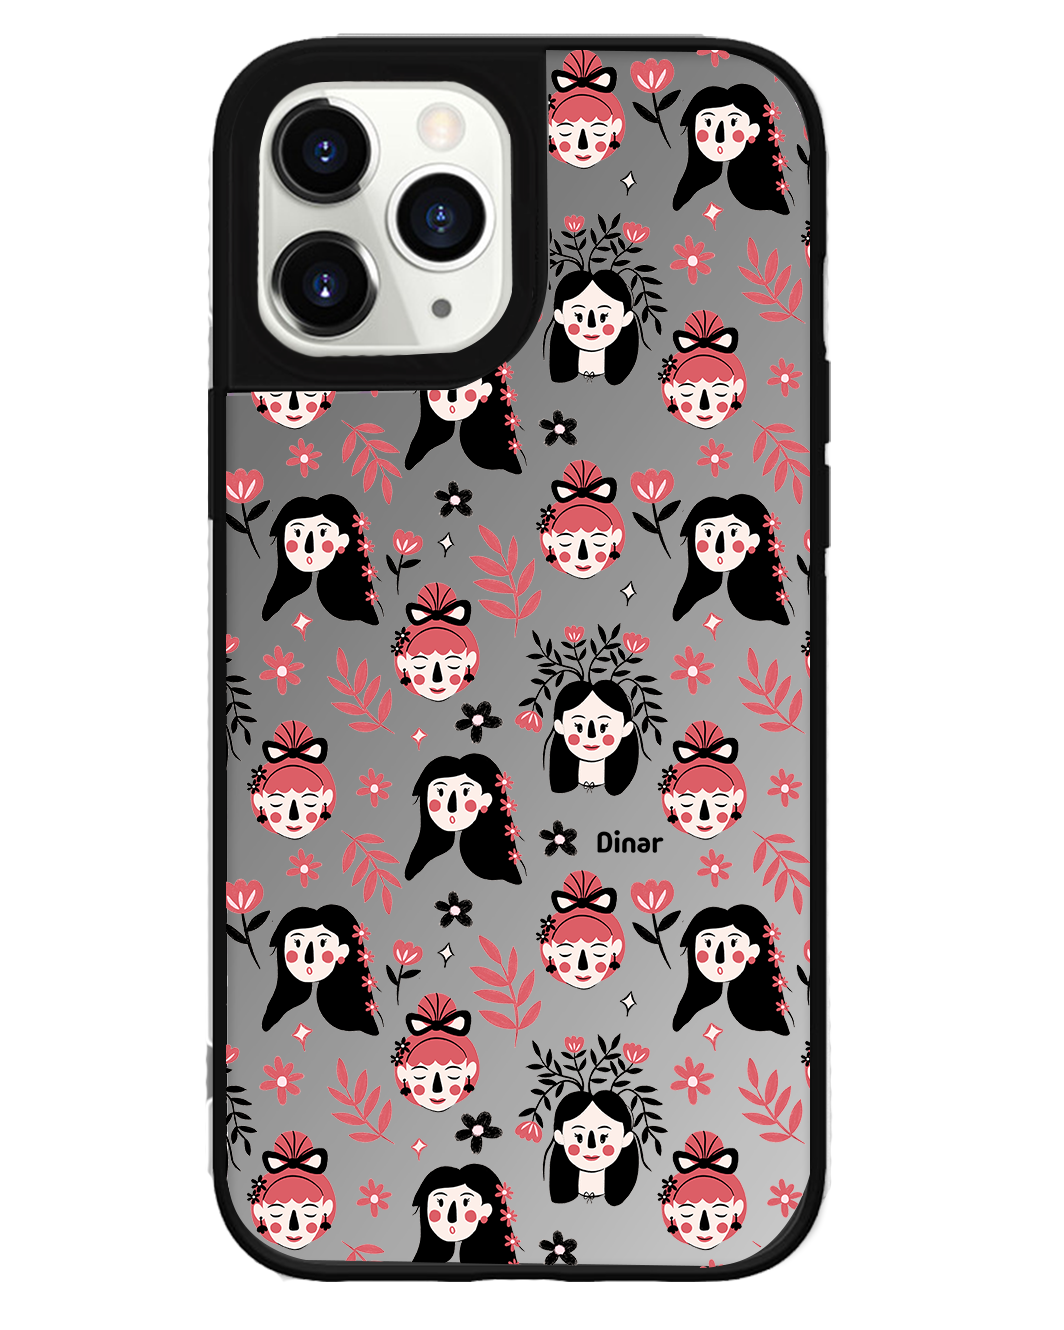 iPhone Mirror Grip Case - Flowery Faces